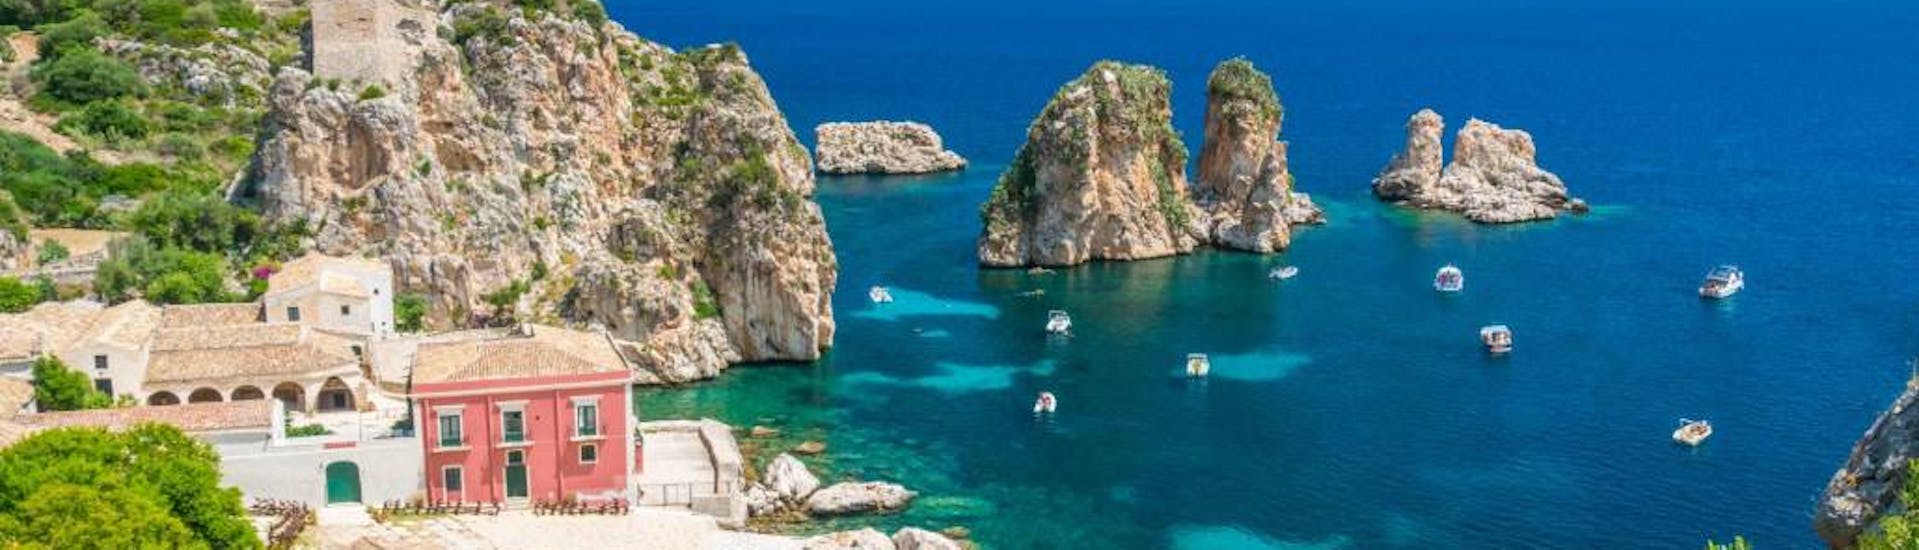 Boat Trip from Palermo to Catsellamare del Golfo with Apéritif & Snorkeling.